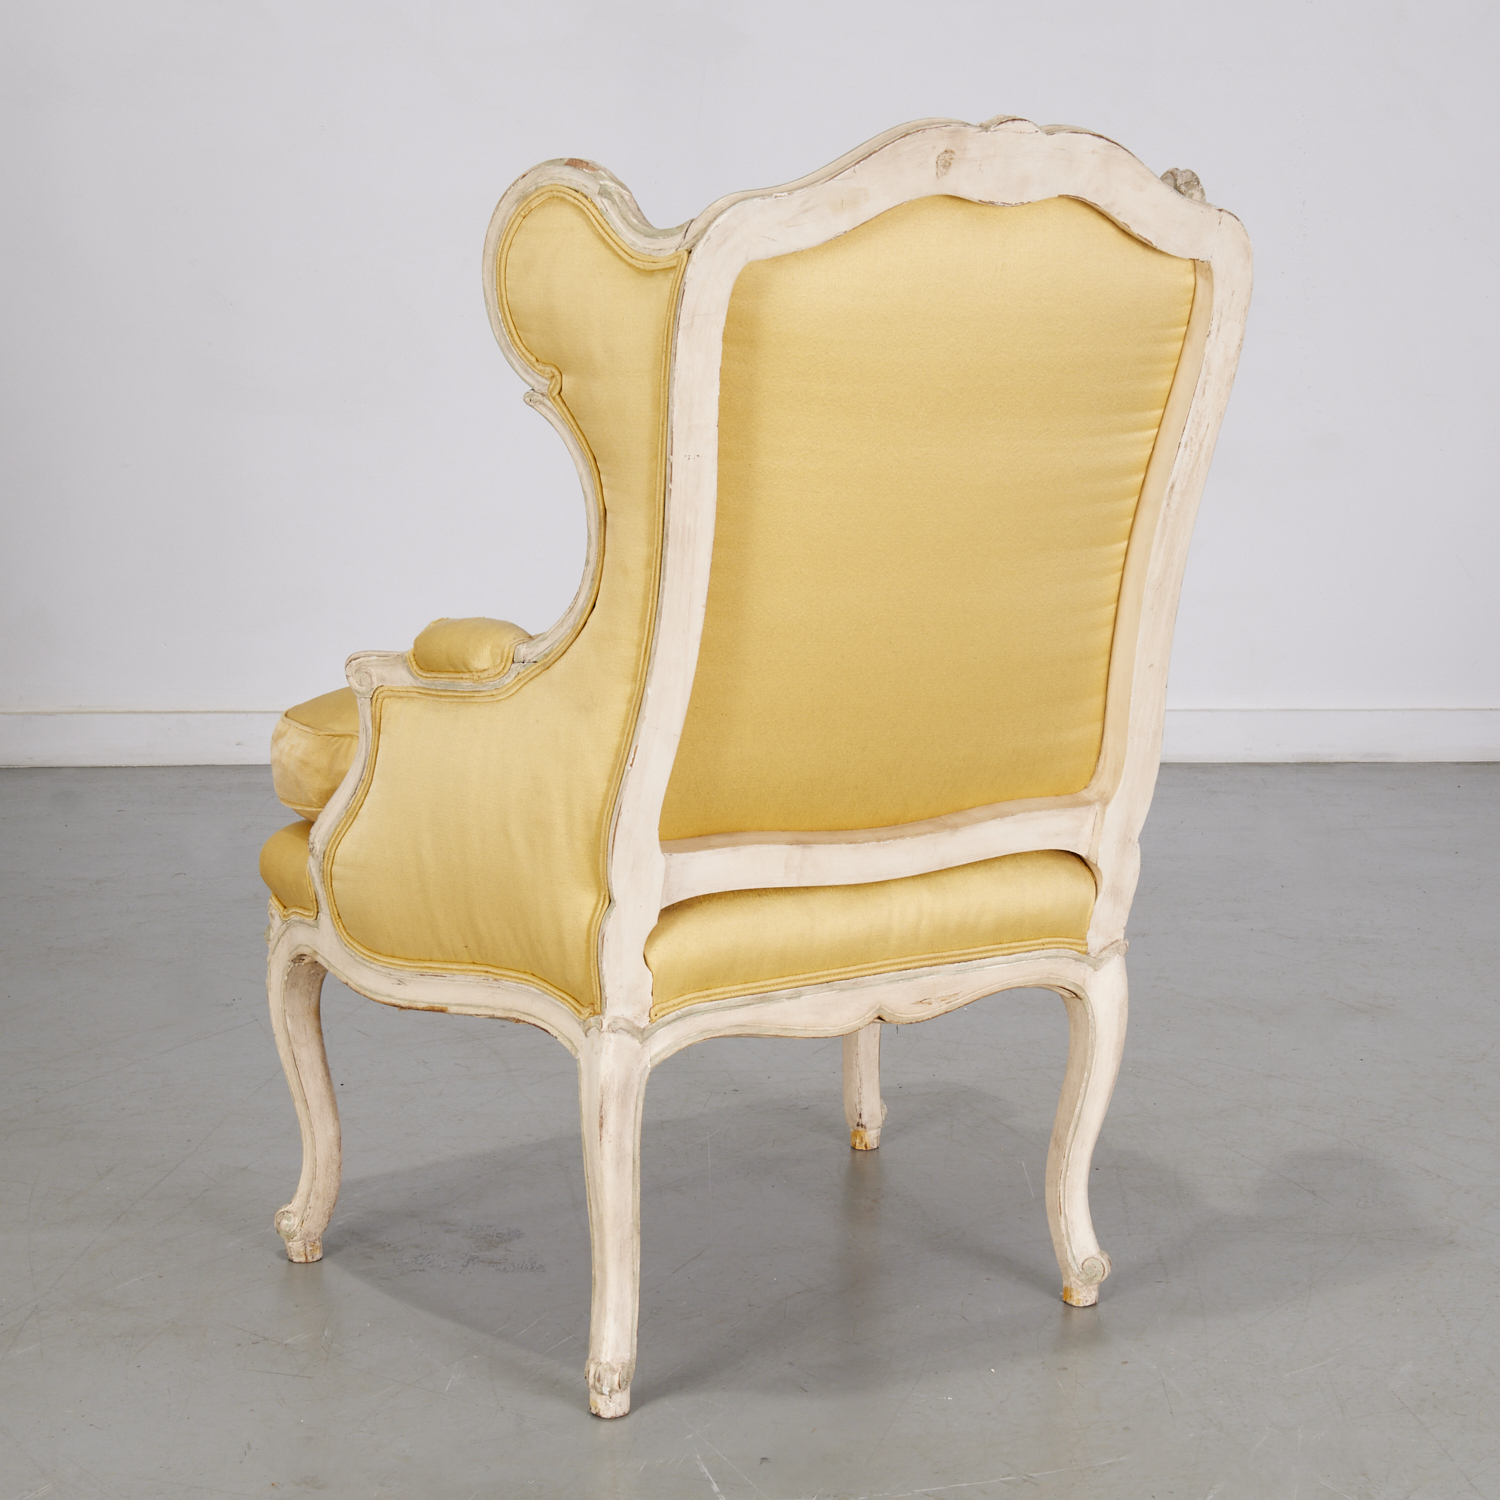 At Auction: Pair French Oversized Louis XV Style Chairs